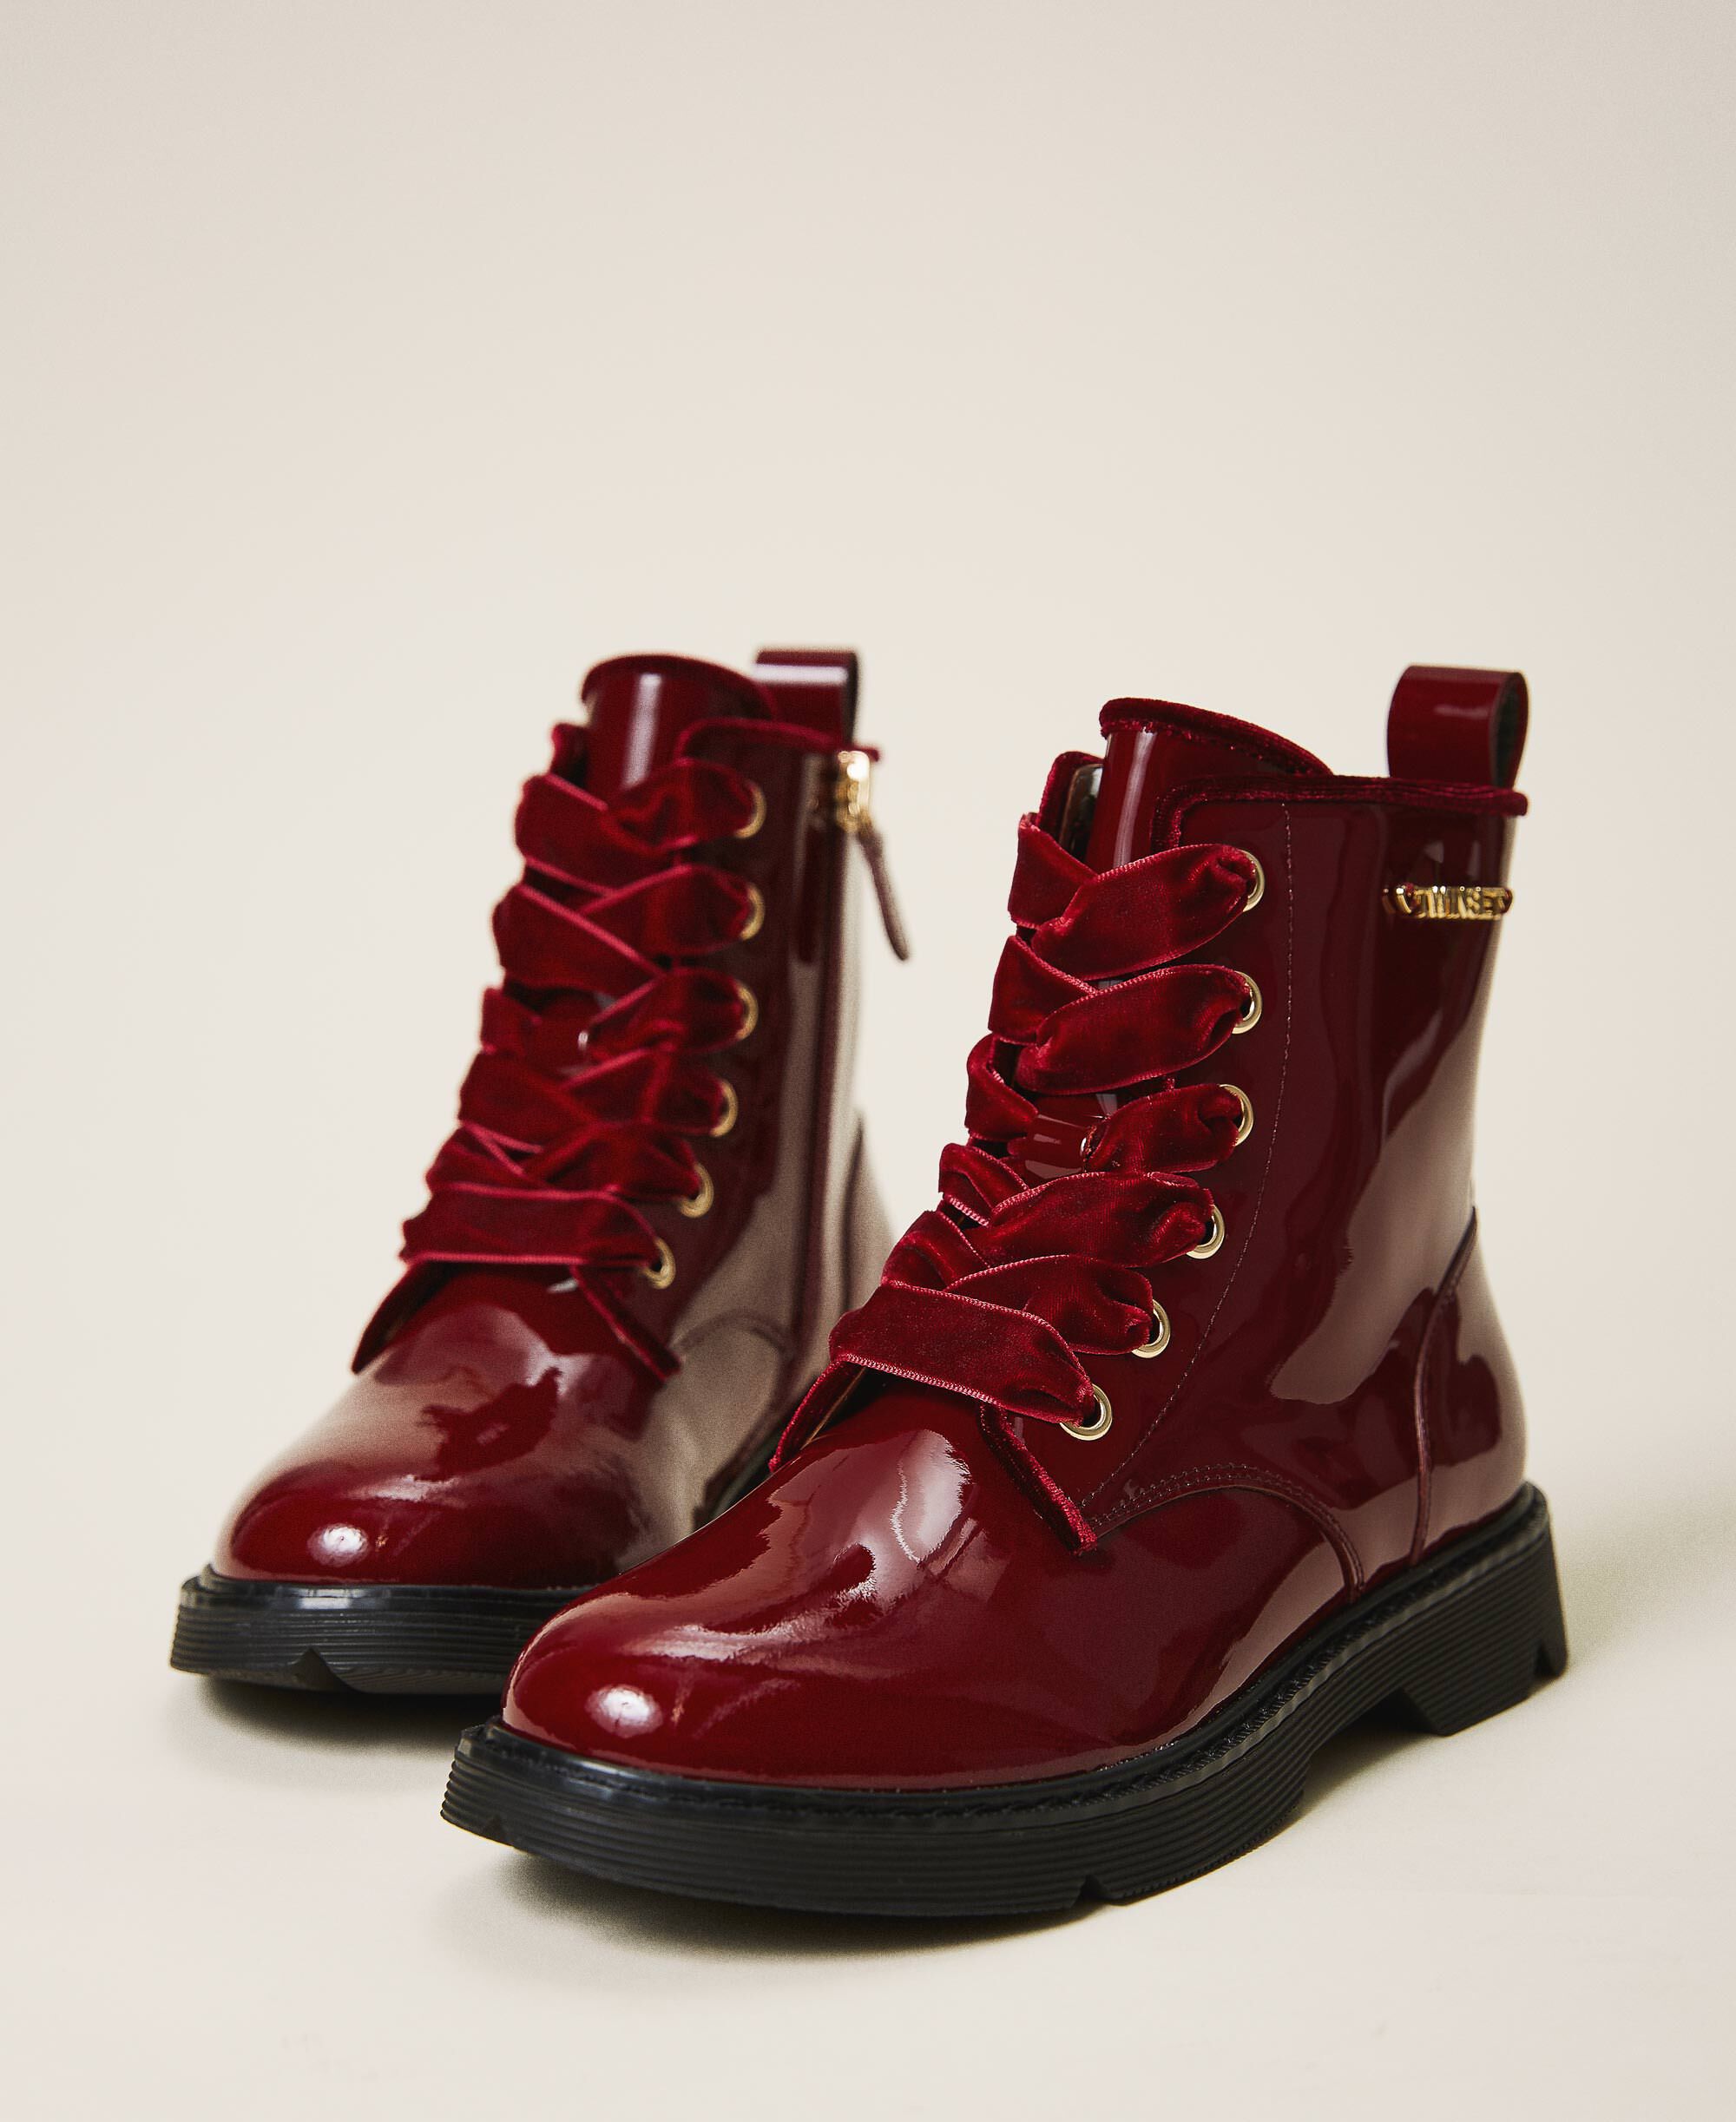 Patent leather combat boots with logo 